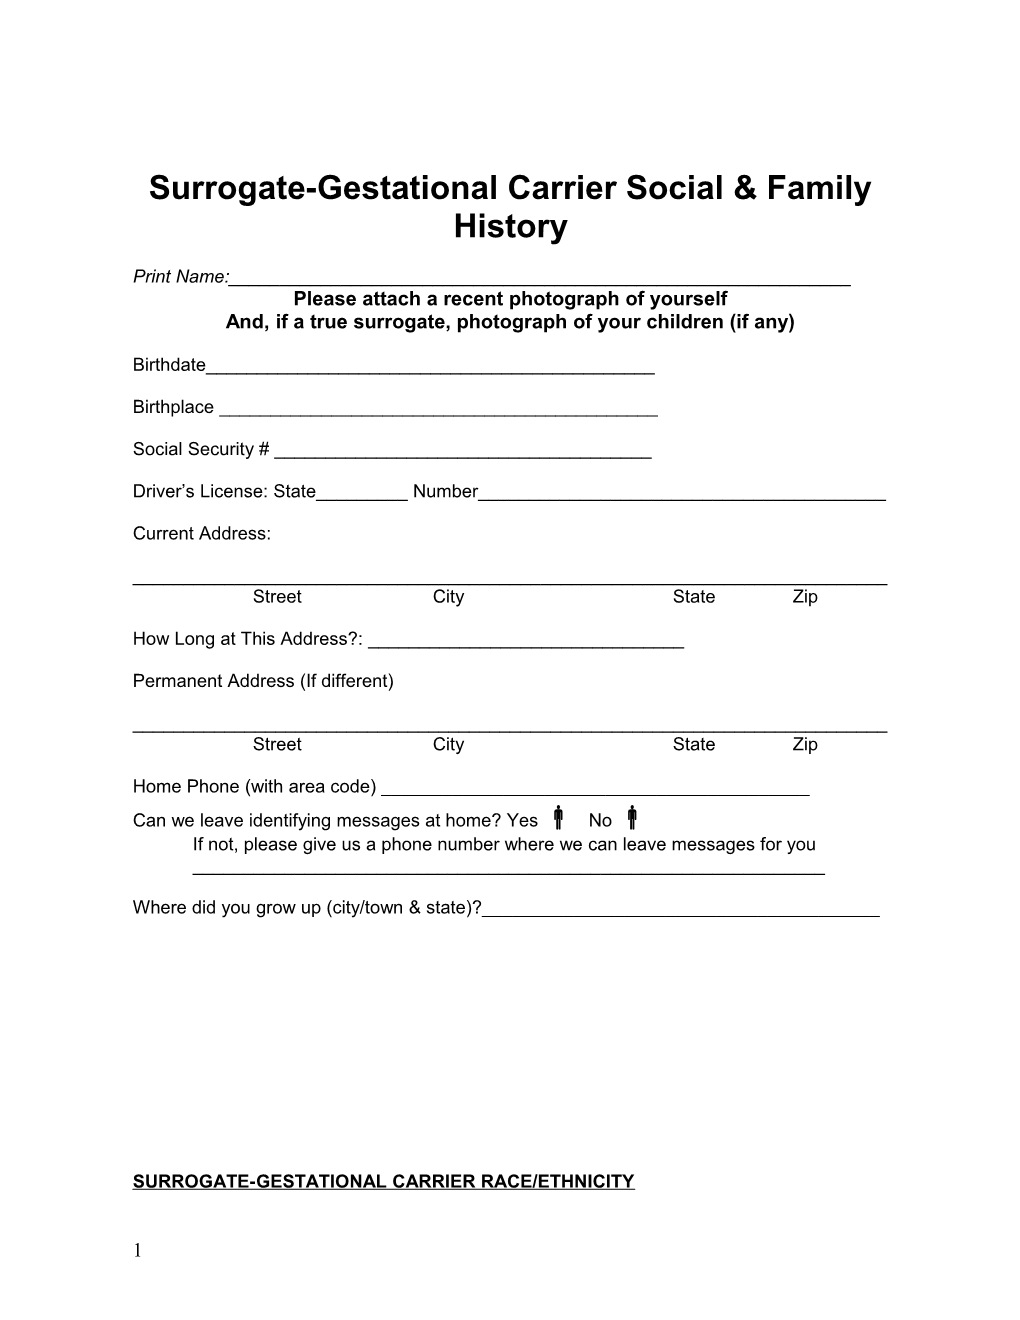 Surrogate-Gestational Carriersocial & Family History